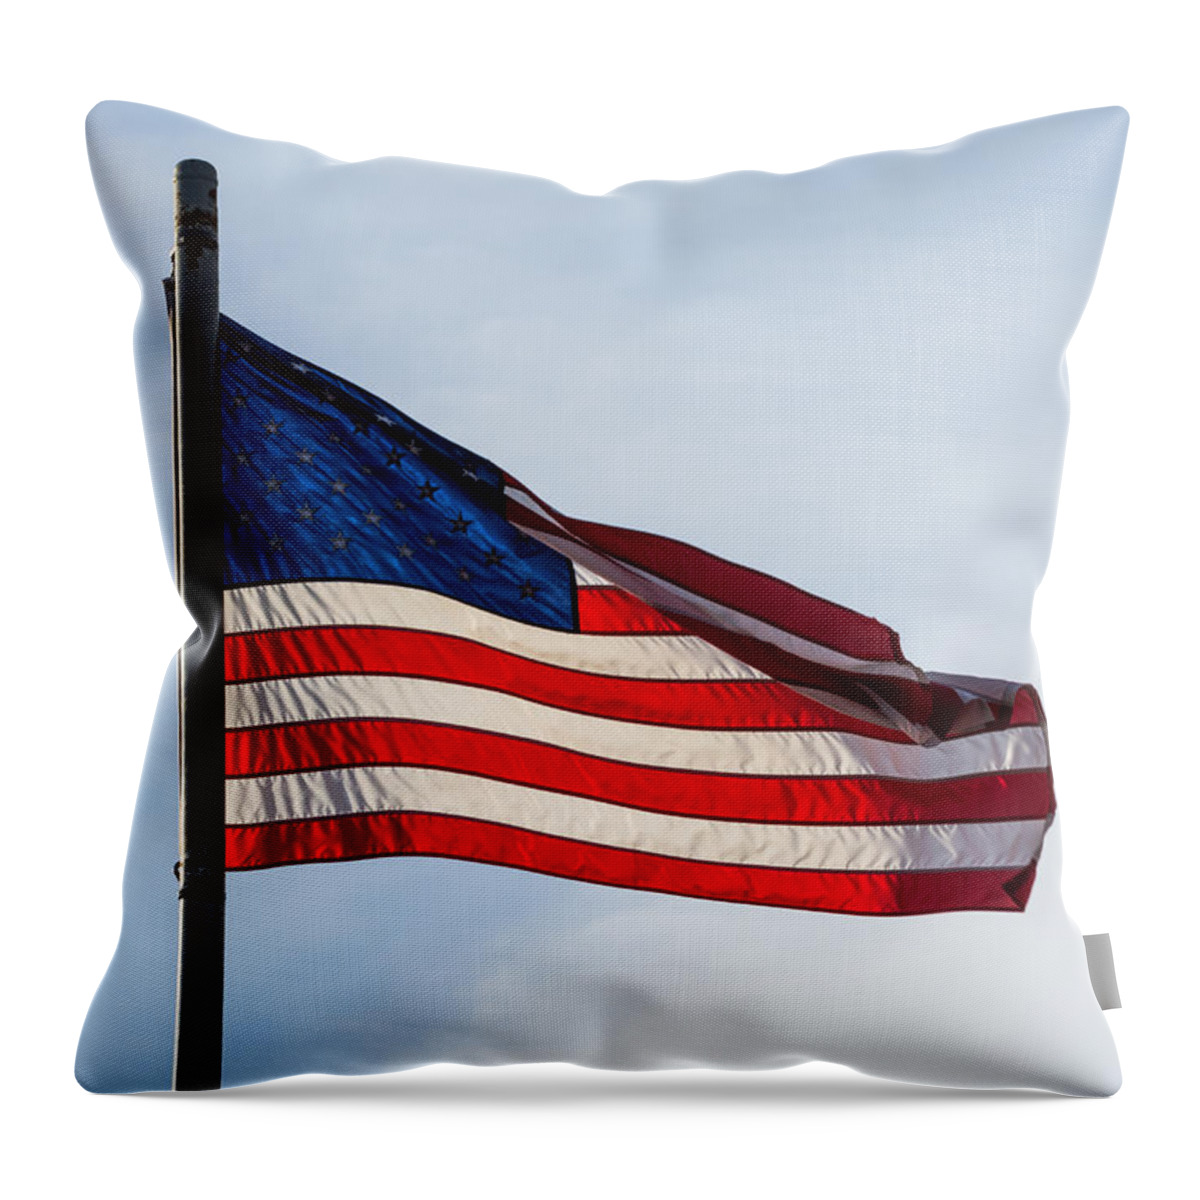 Sunlit Throw Pillow featuring the photograph Sunlit Flag by Holden The Moment